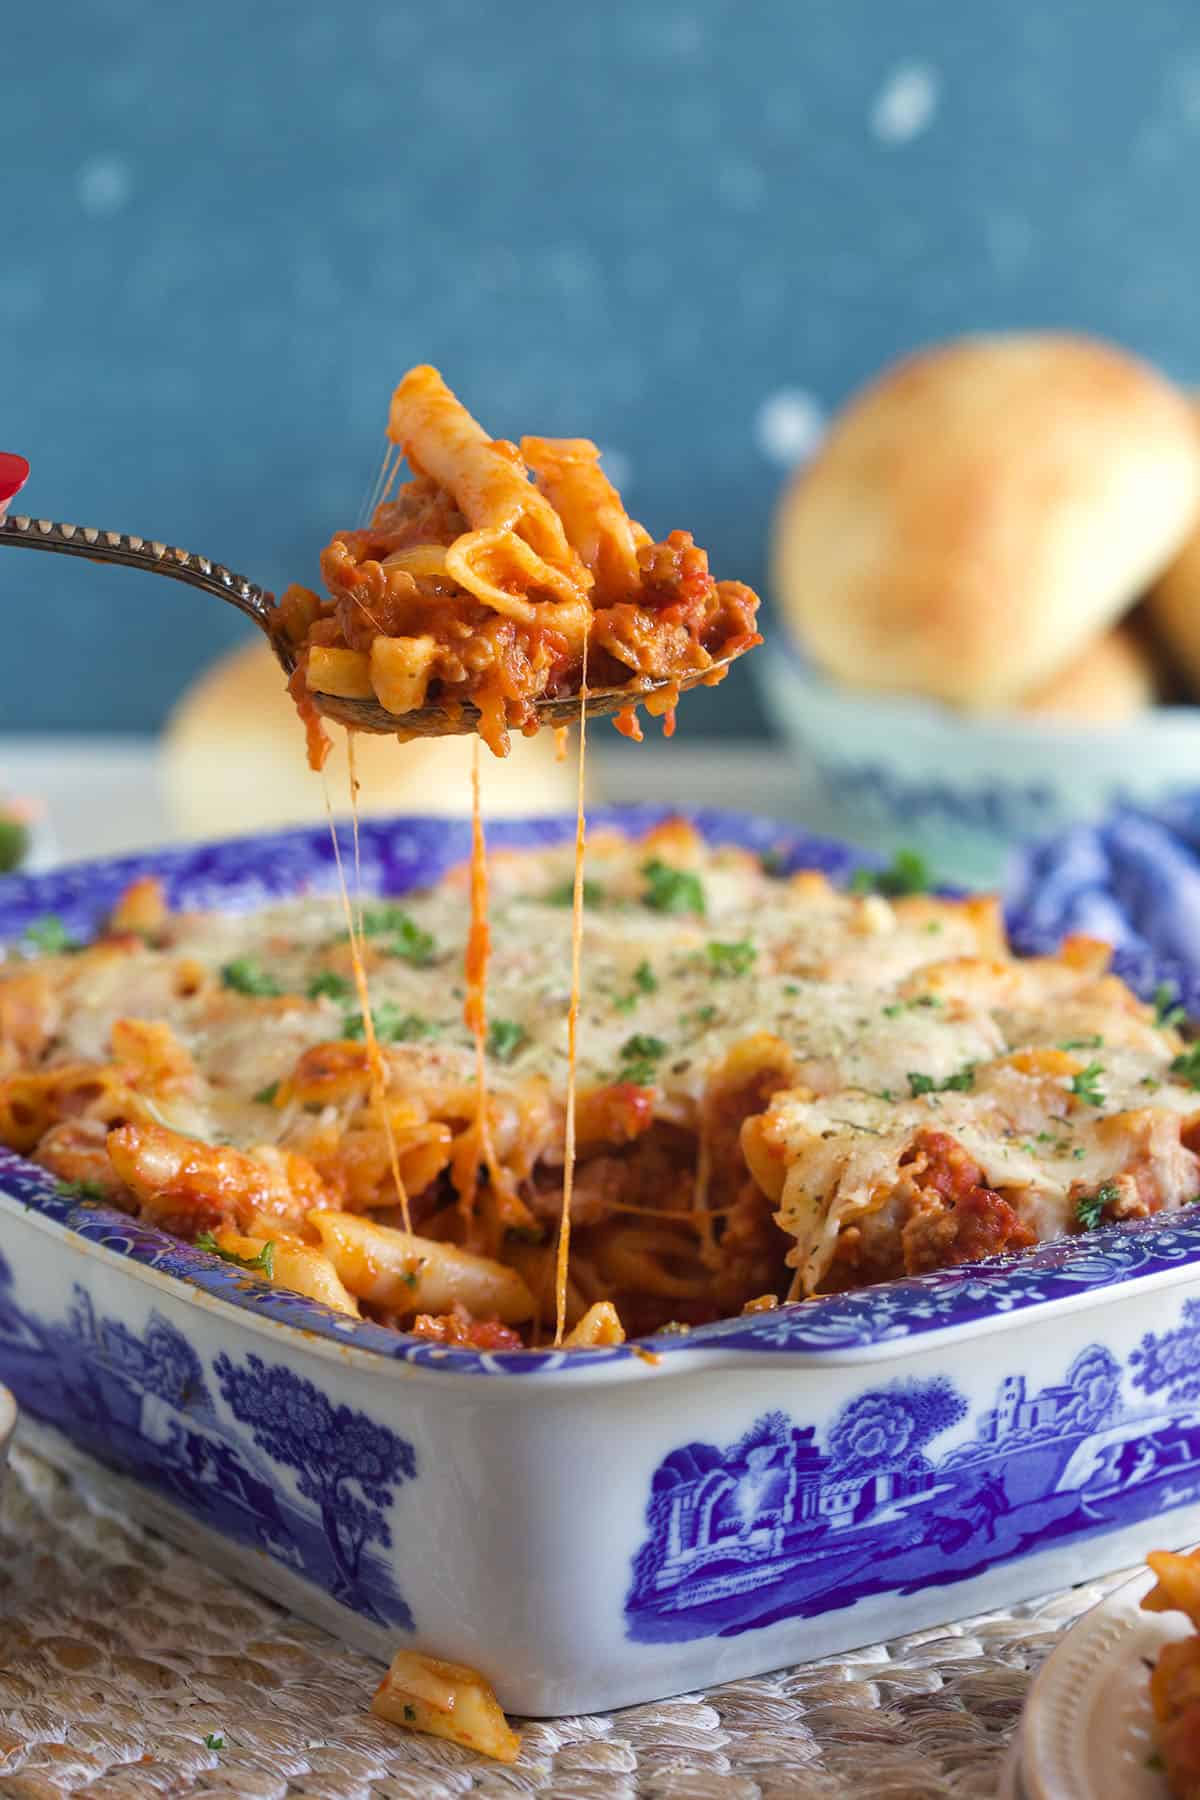 A serving of mostaccioli is being lifted from a blue and white baking dish.